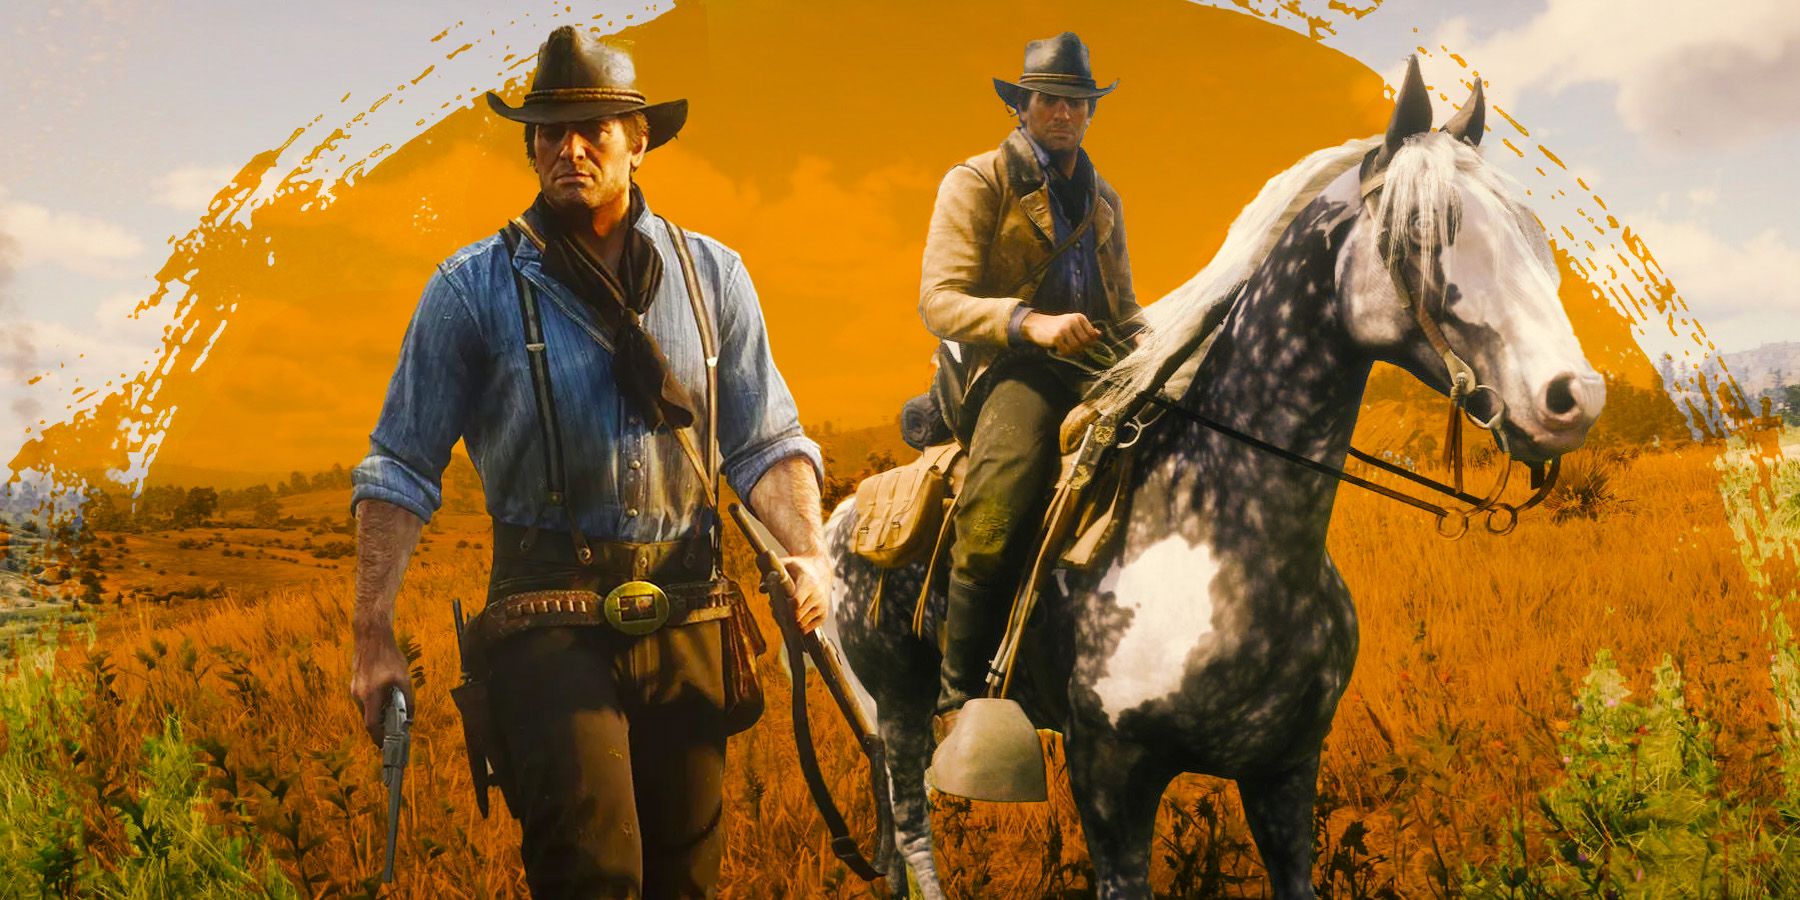 Arthur with a lasso and Arthur on top of the Missouri Fox Trotter in Red Dead Redemption 2